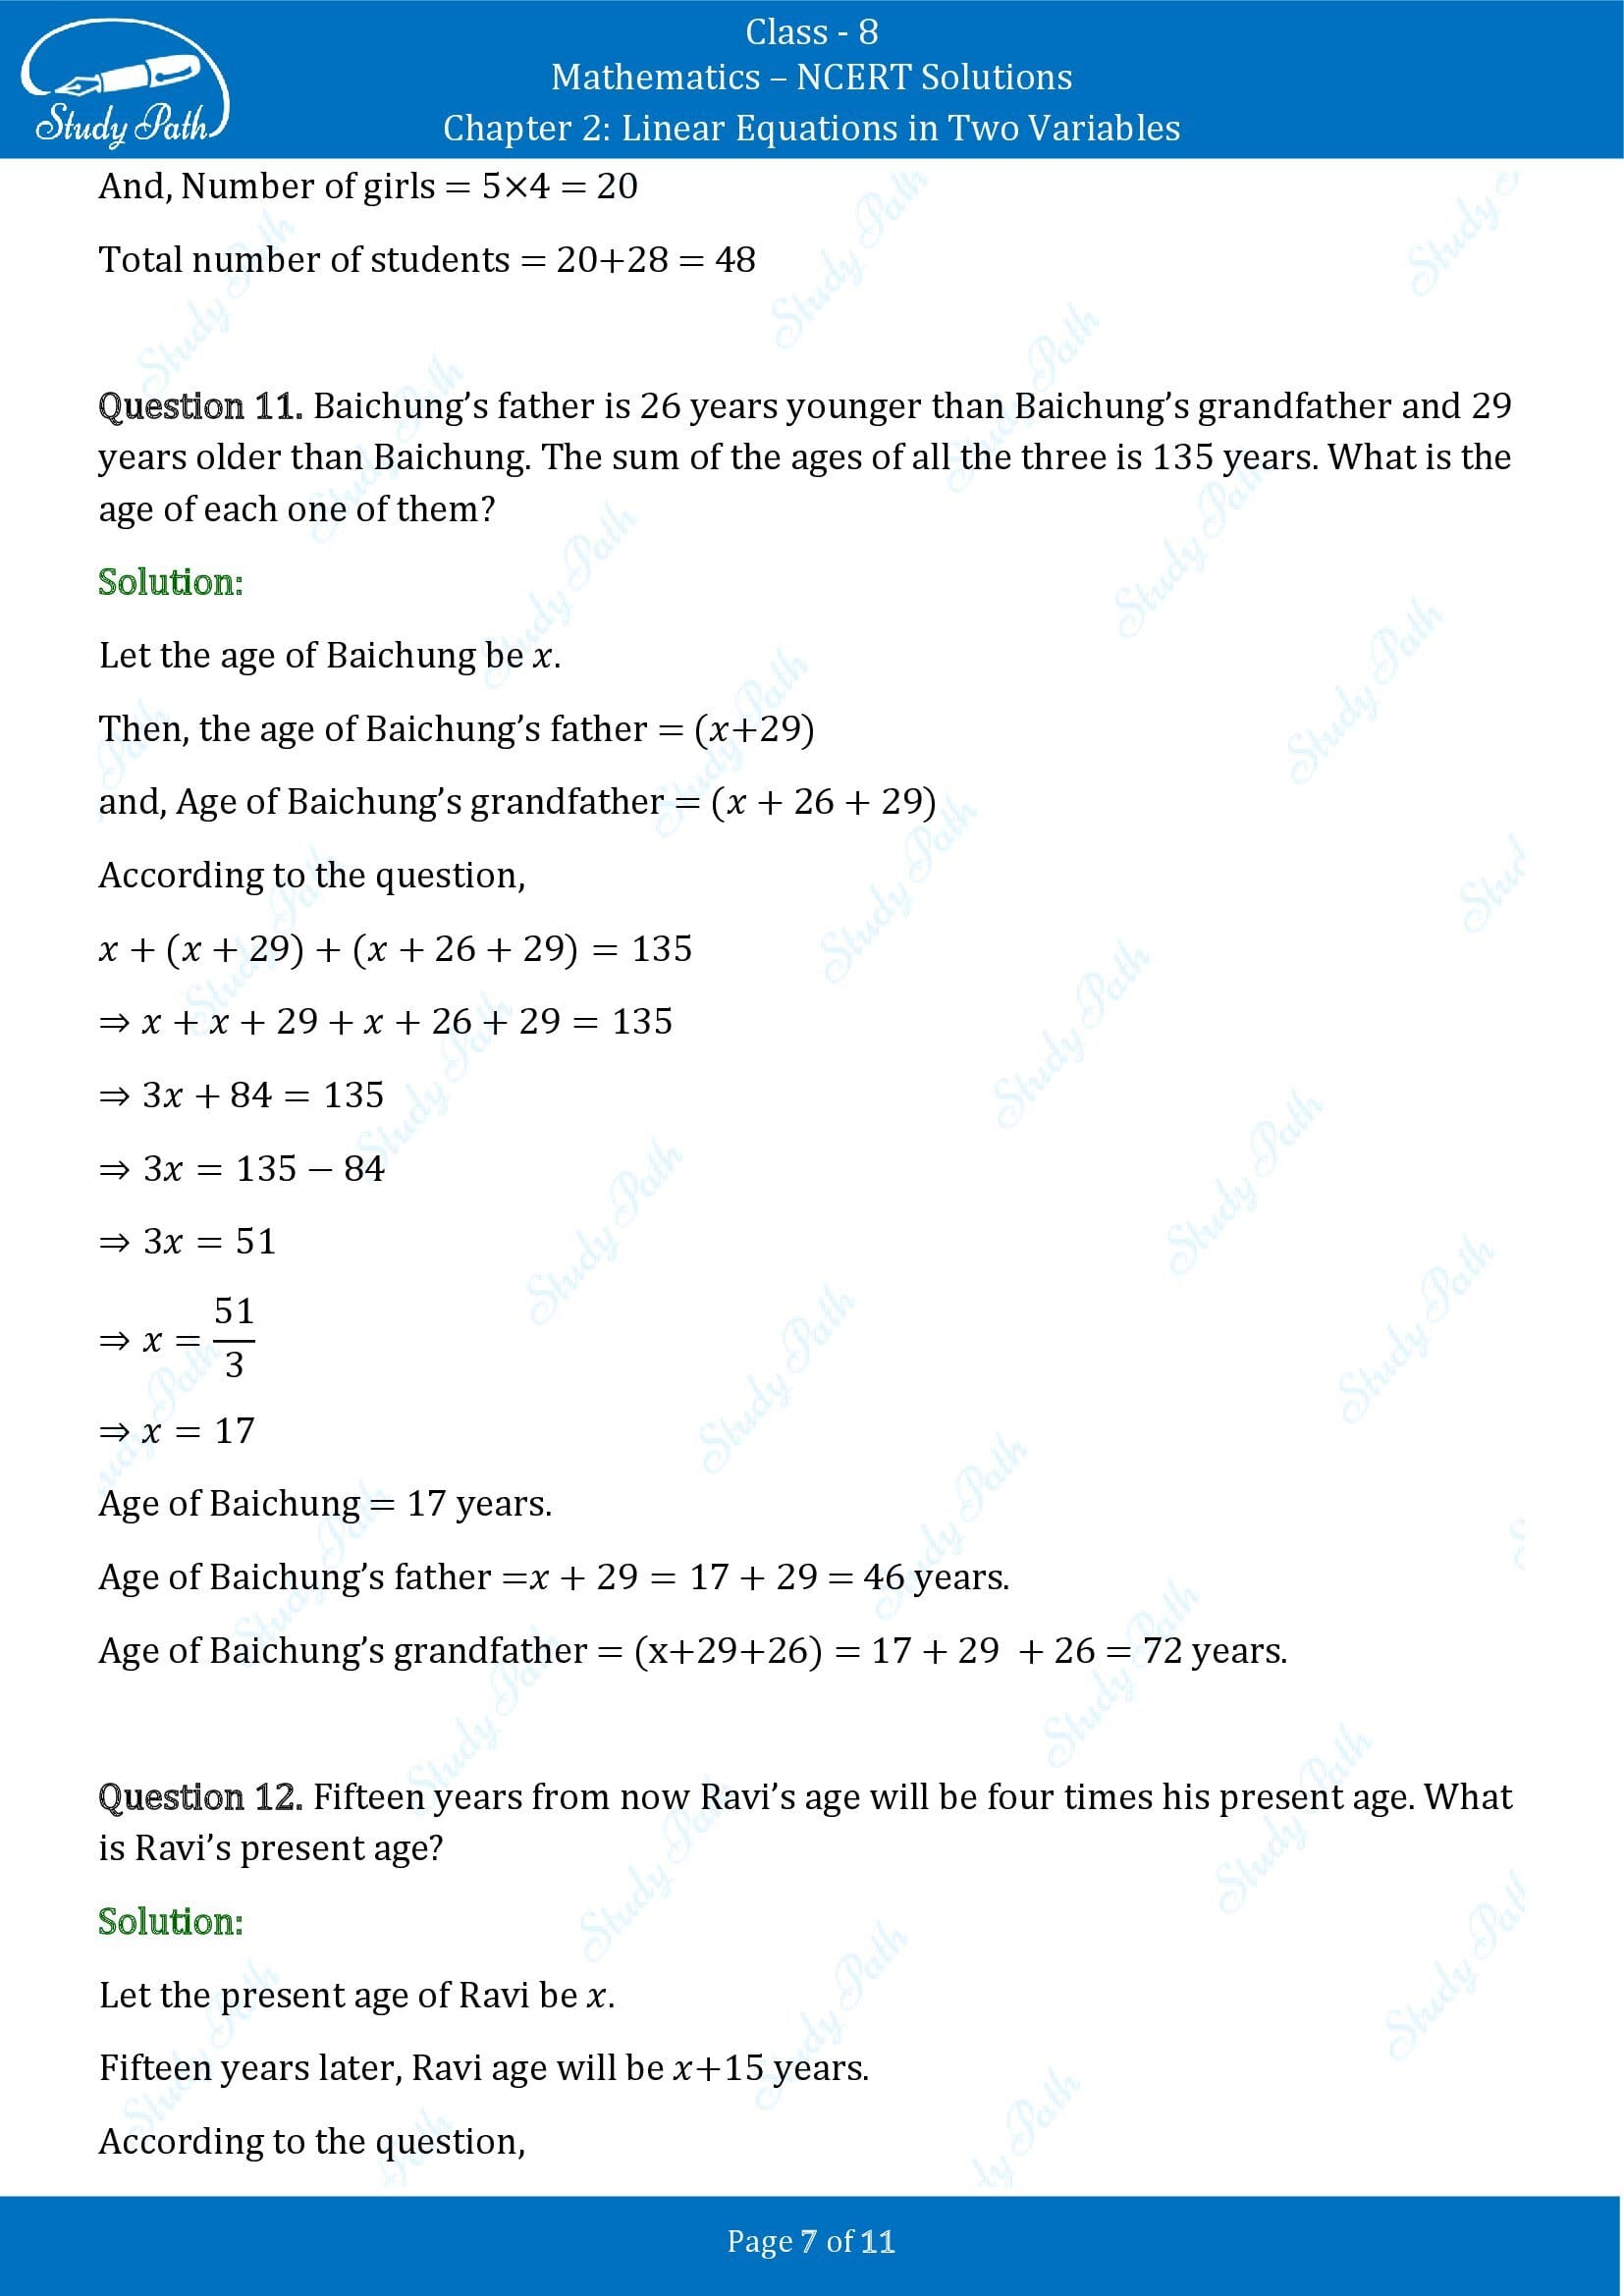 NCERT Solutions for Class 8 Maths Chapter 2 Linear Equations in Two Variables Exercise 2.2 00007